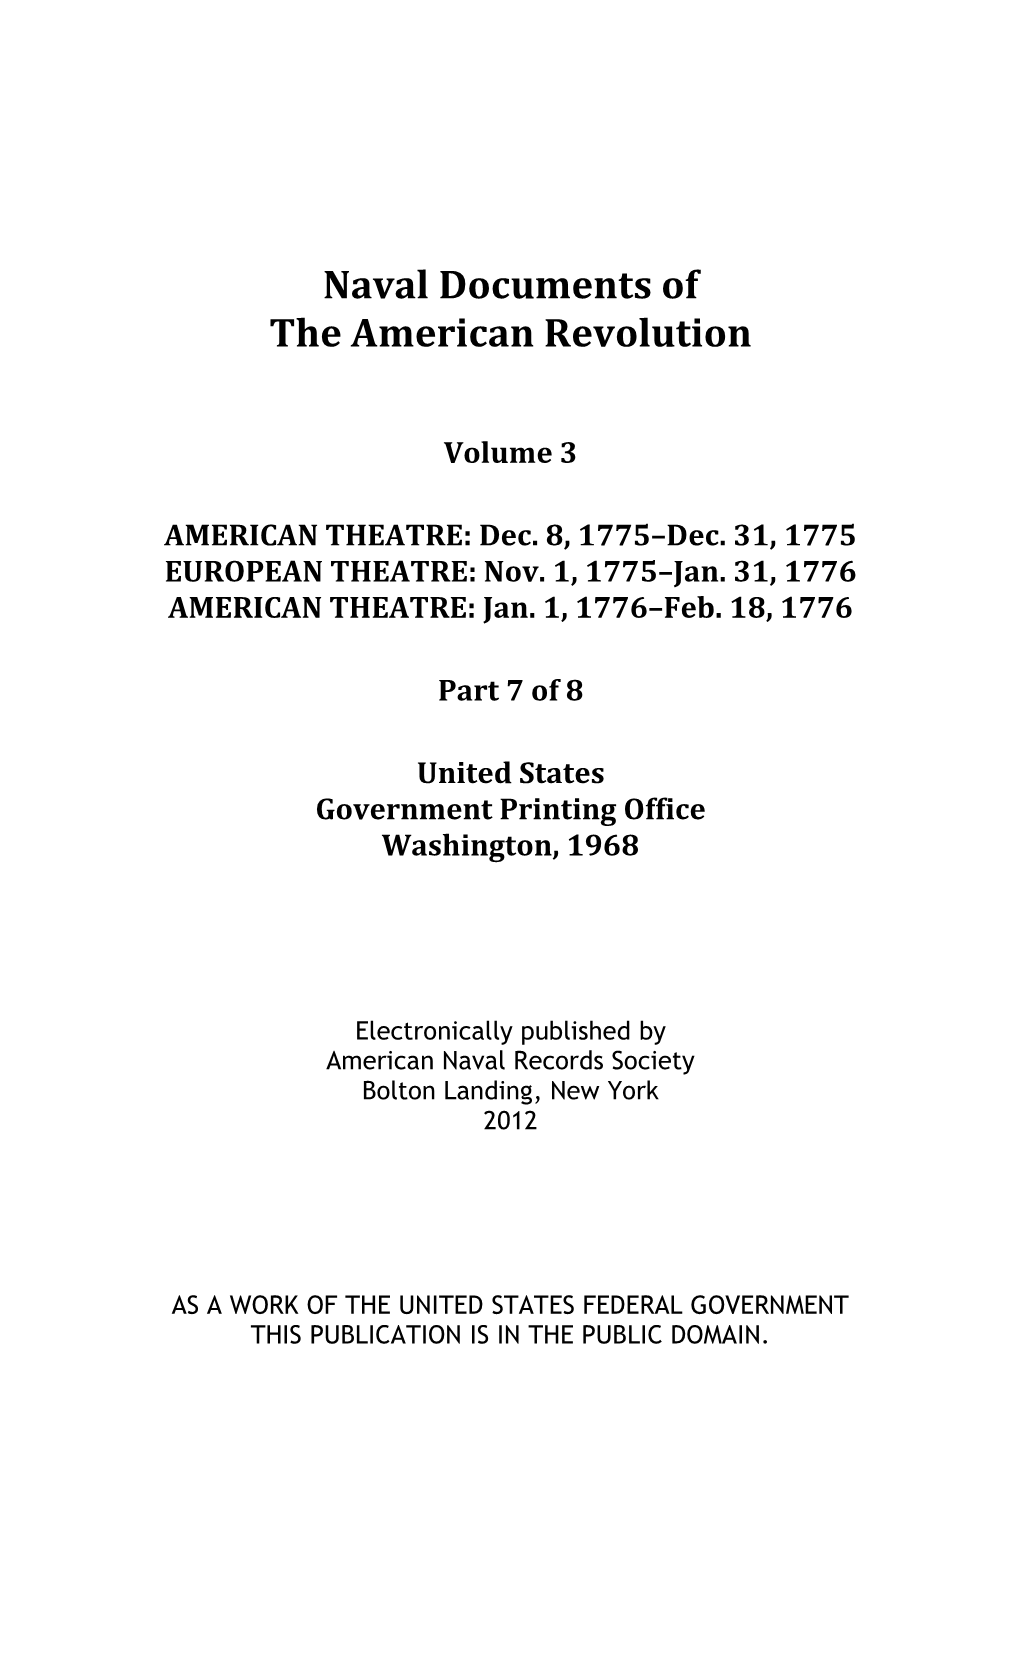 Naval Documents of the American Revolution, Volume 3, Part 7